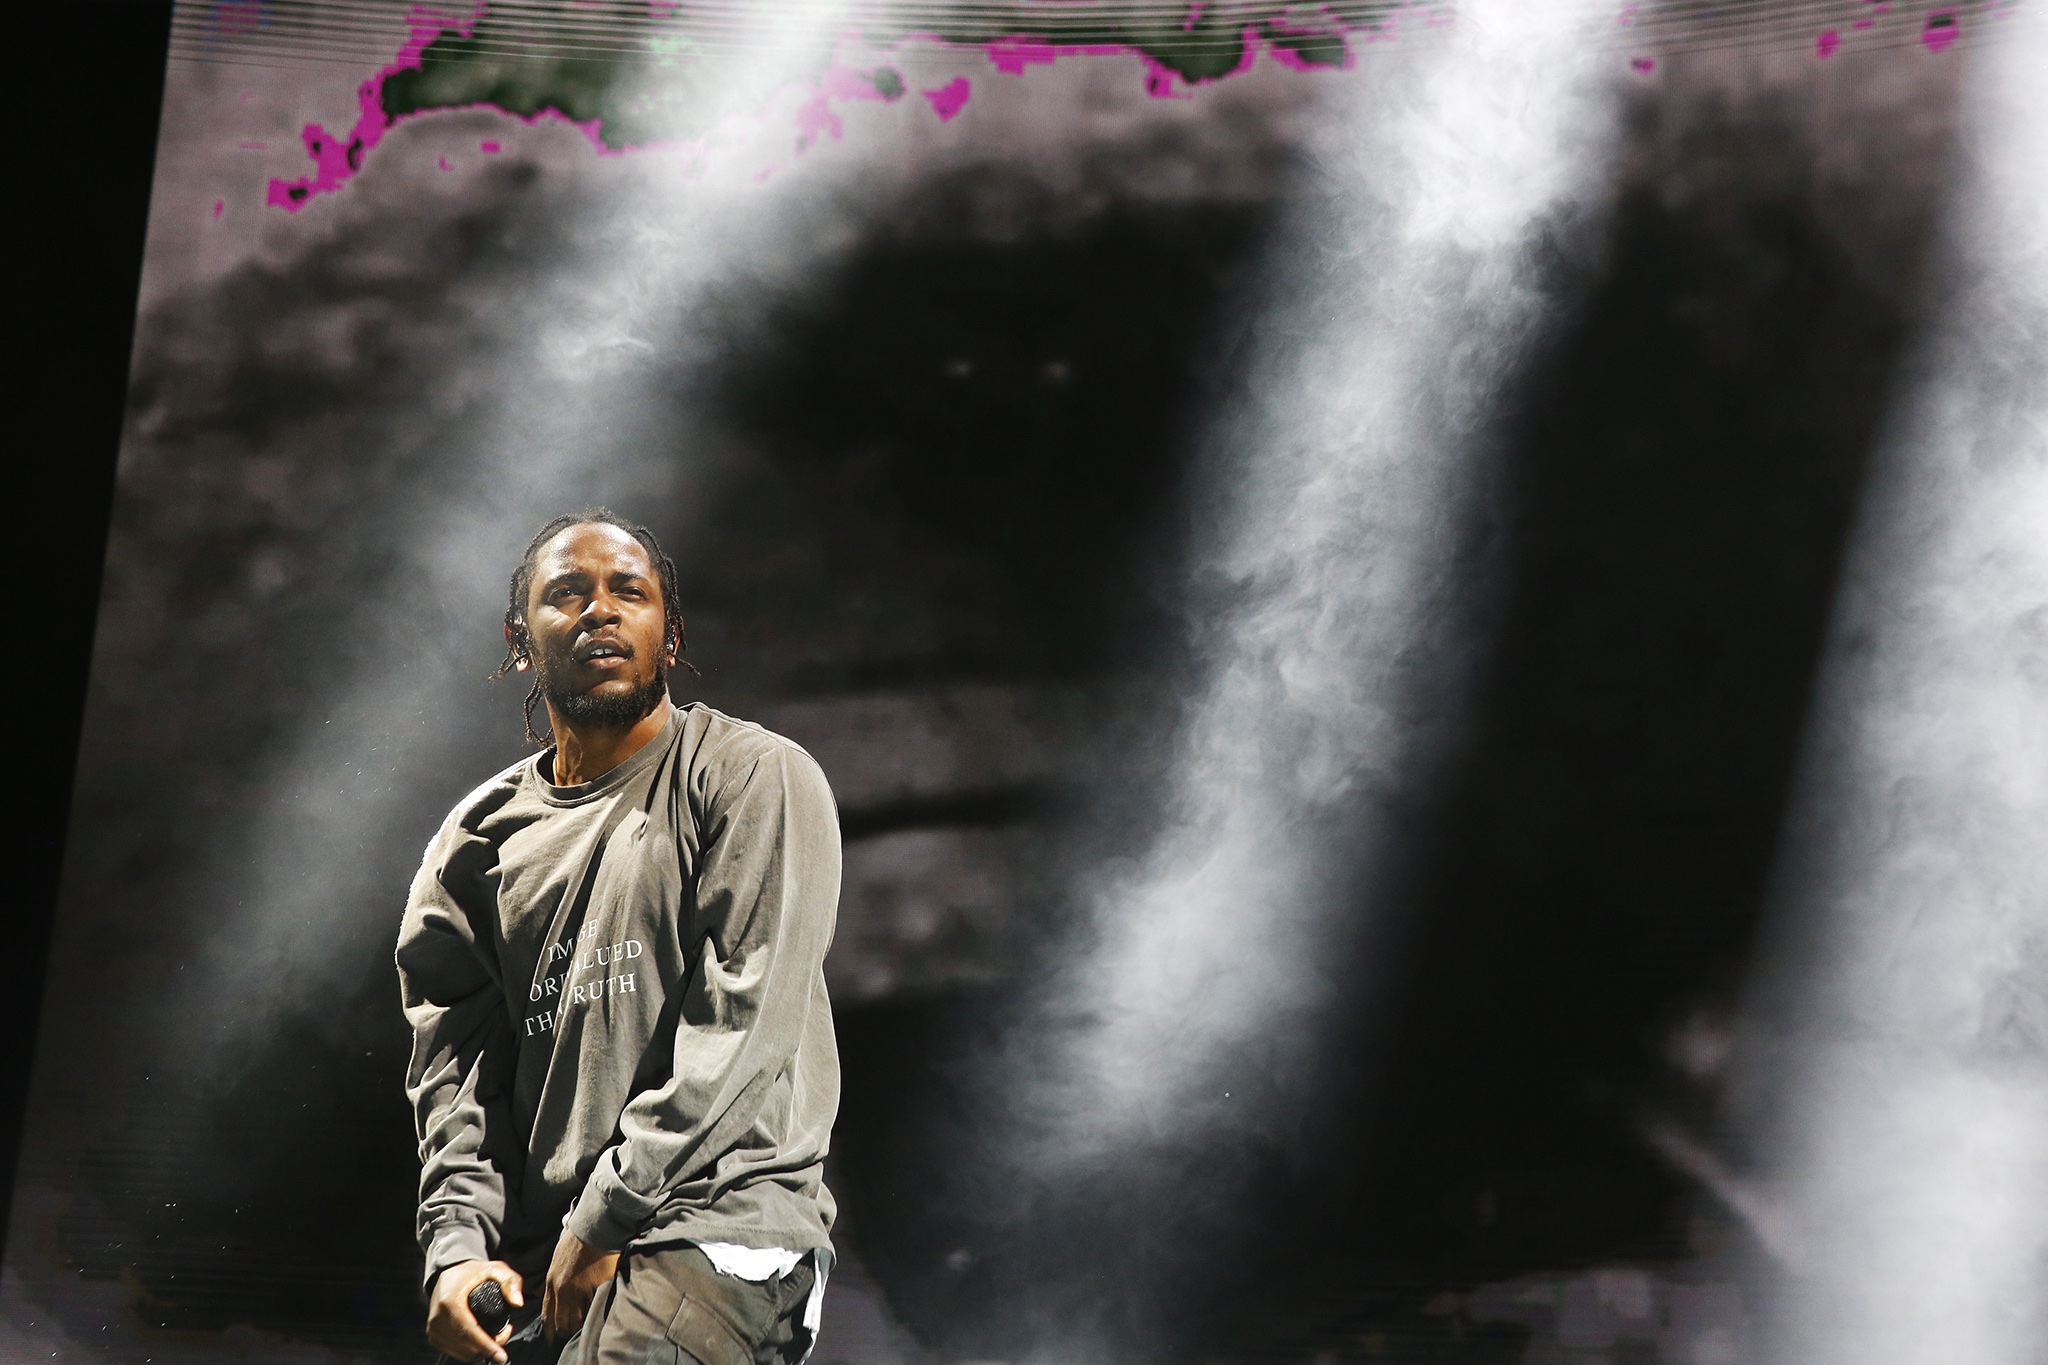 Kendrick Lamar 8/27/16 @ Fuck Yeah Fest. Photo by Tod Seelie for FYF Fest. Used With Permission By www.BlurredCulture.com.